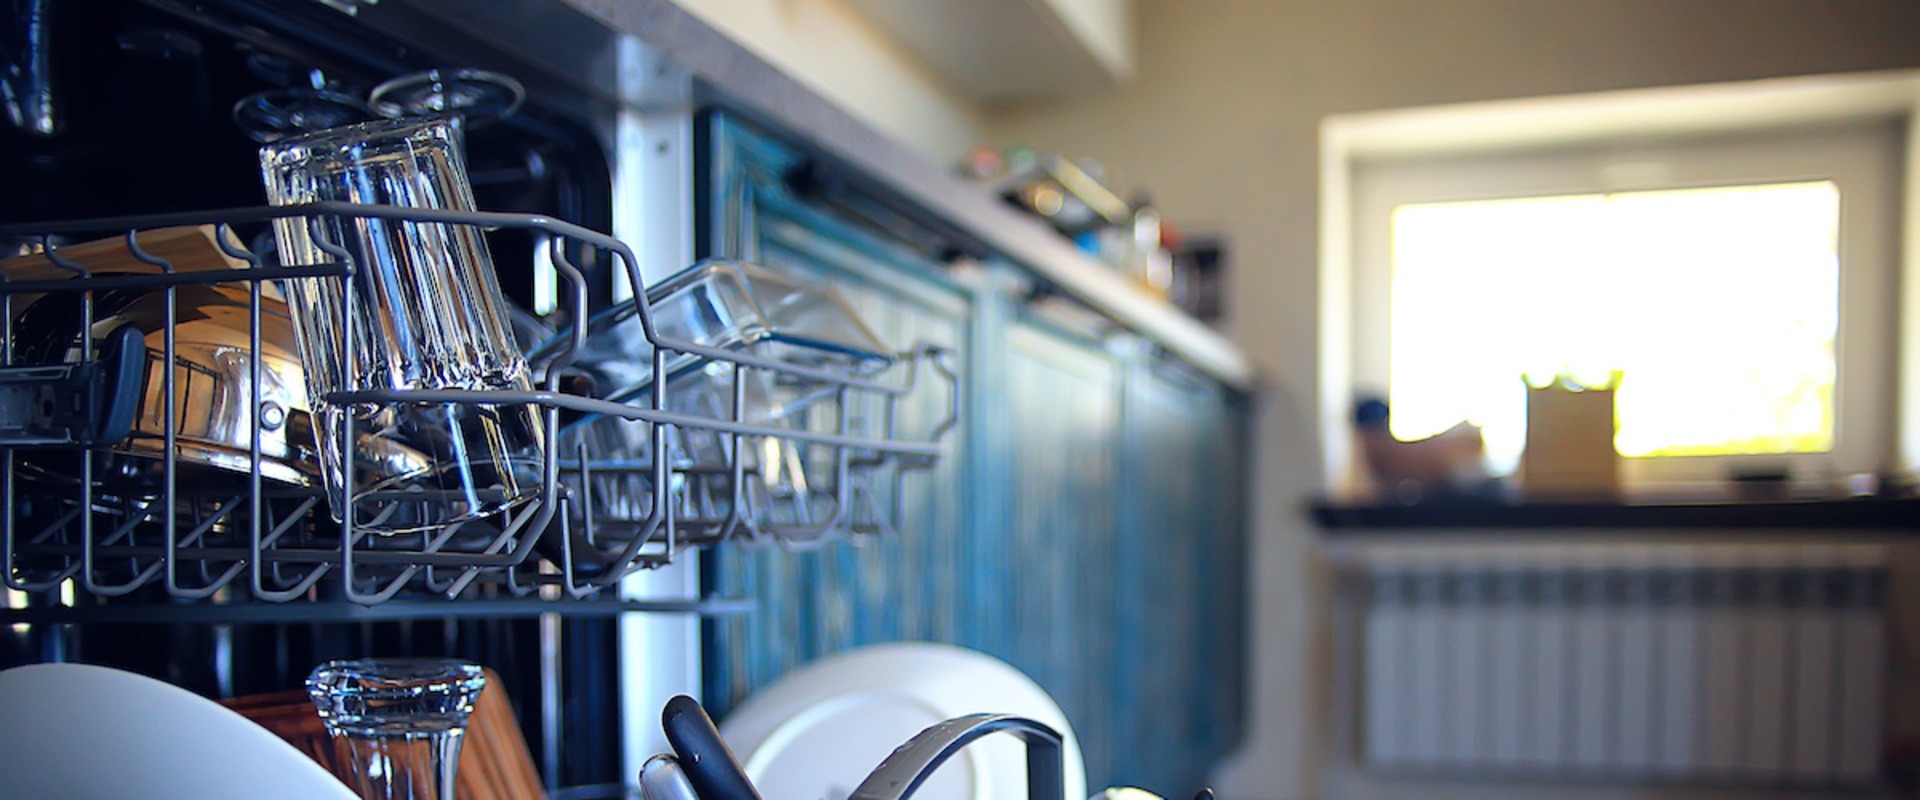 How to Prevent Dishwasher Leaks and Avoid Water Damage